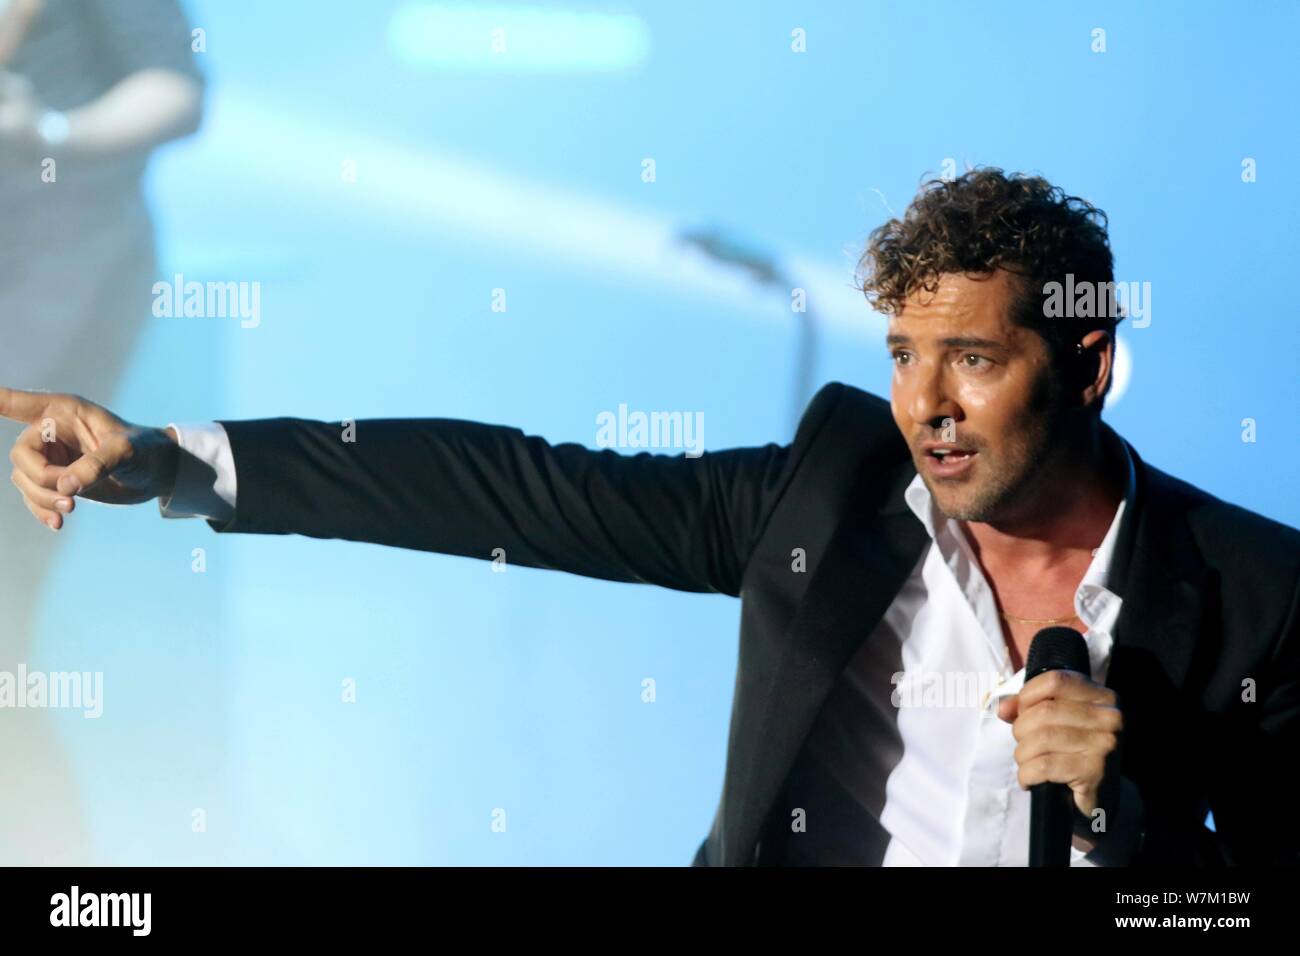 Marbella, Spain. 07th Aug, 2019. David Bisbal concert in Marbella on Tuesday 07 August 2019 Credit: CORDON PRESS/Alamy Live News Stock Photo